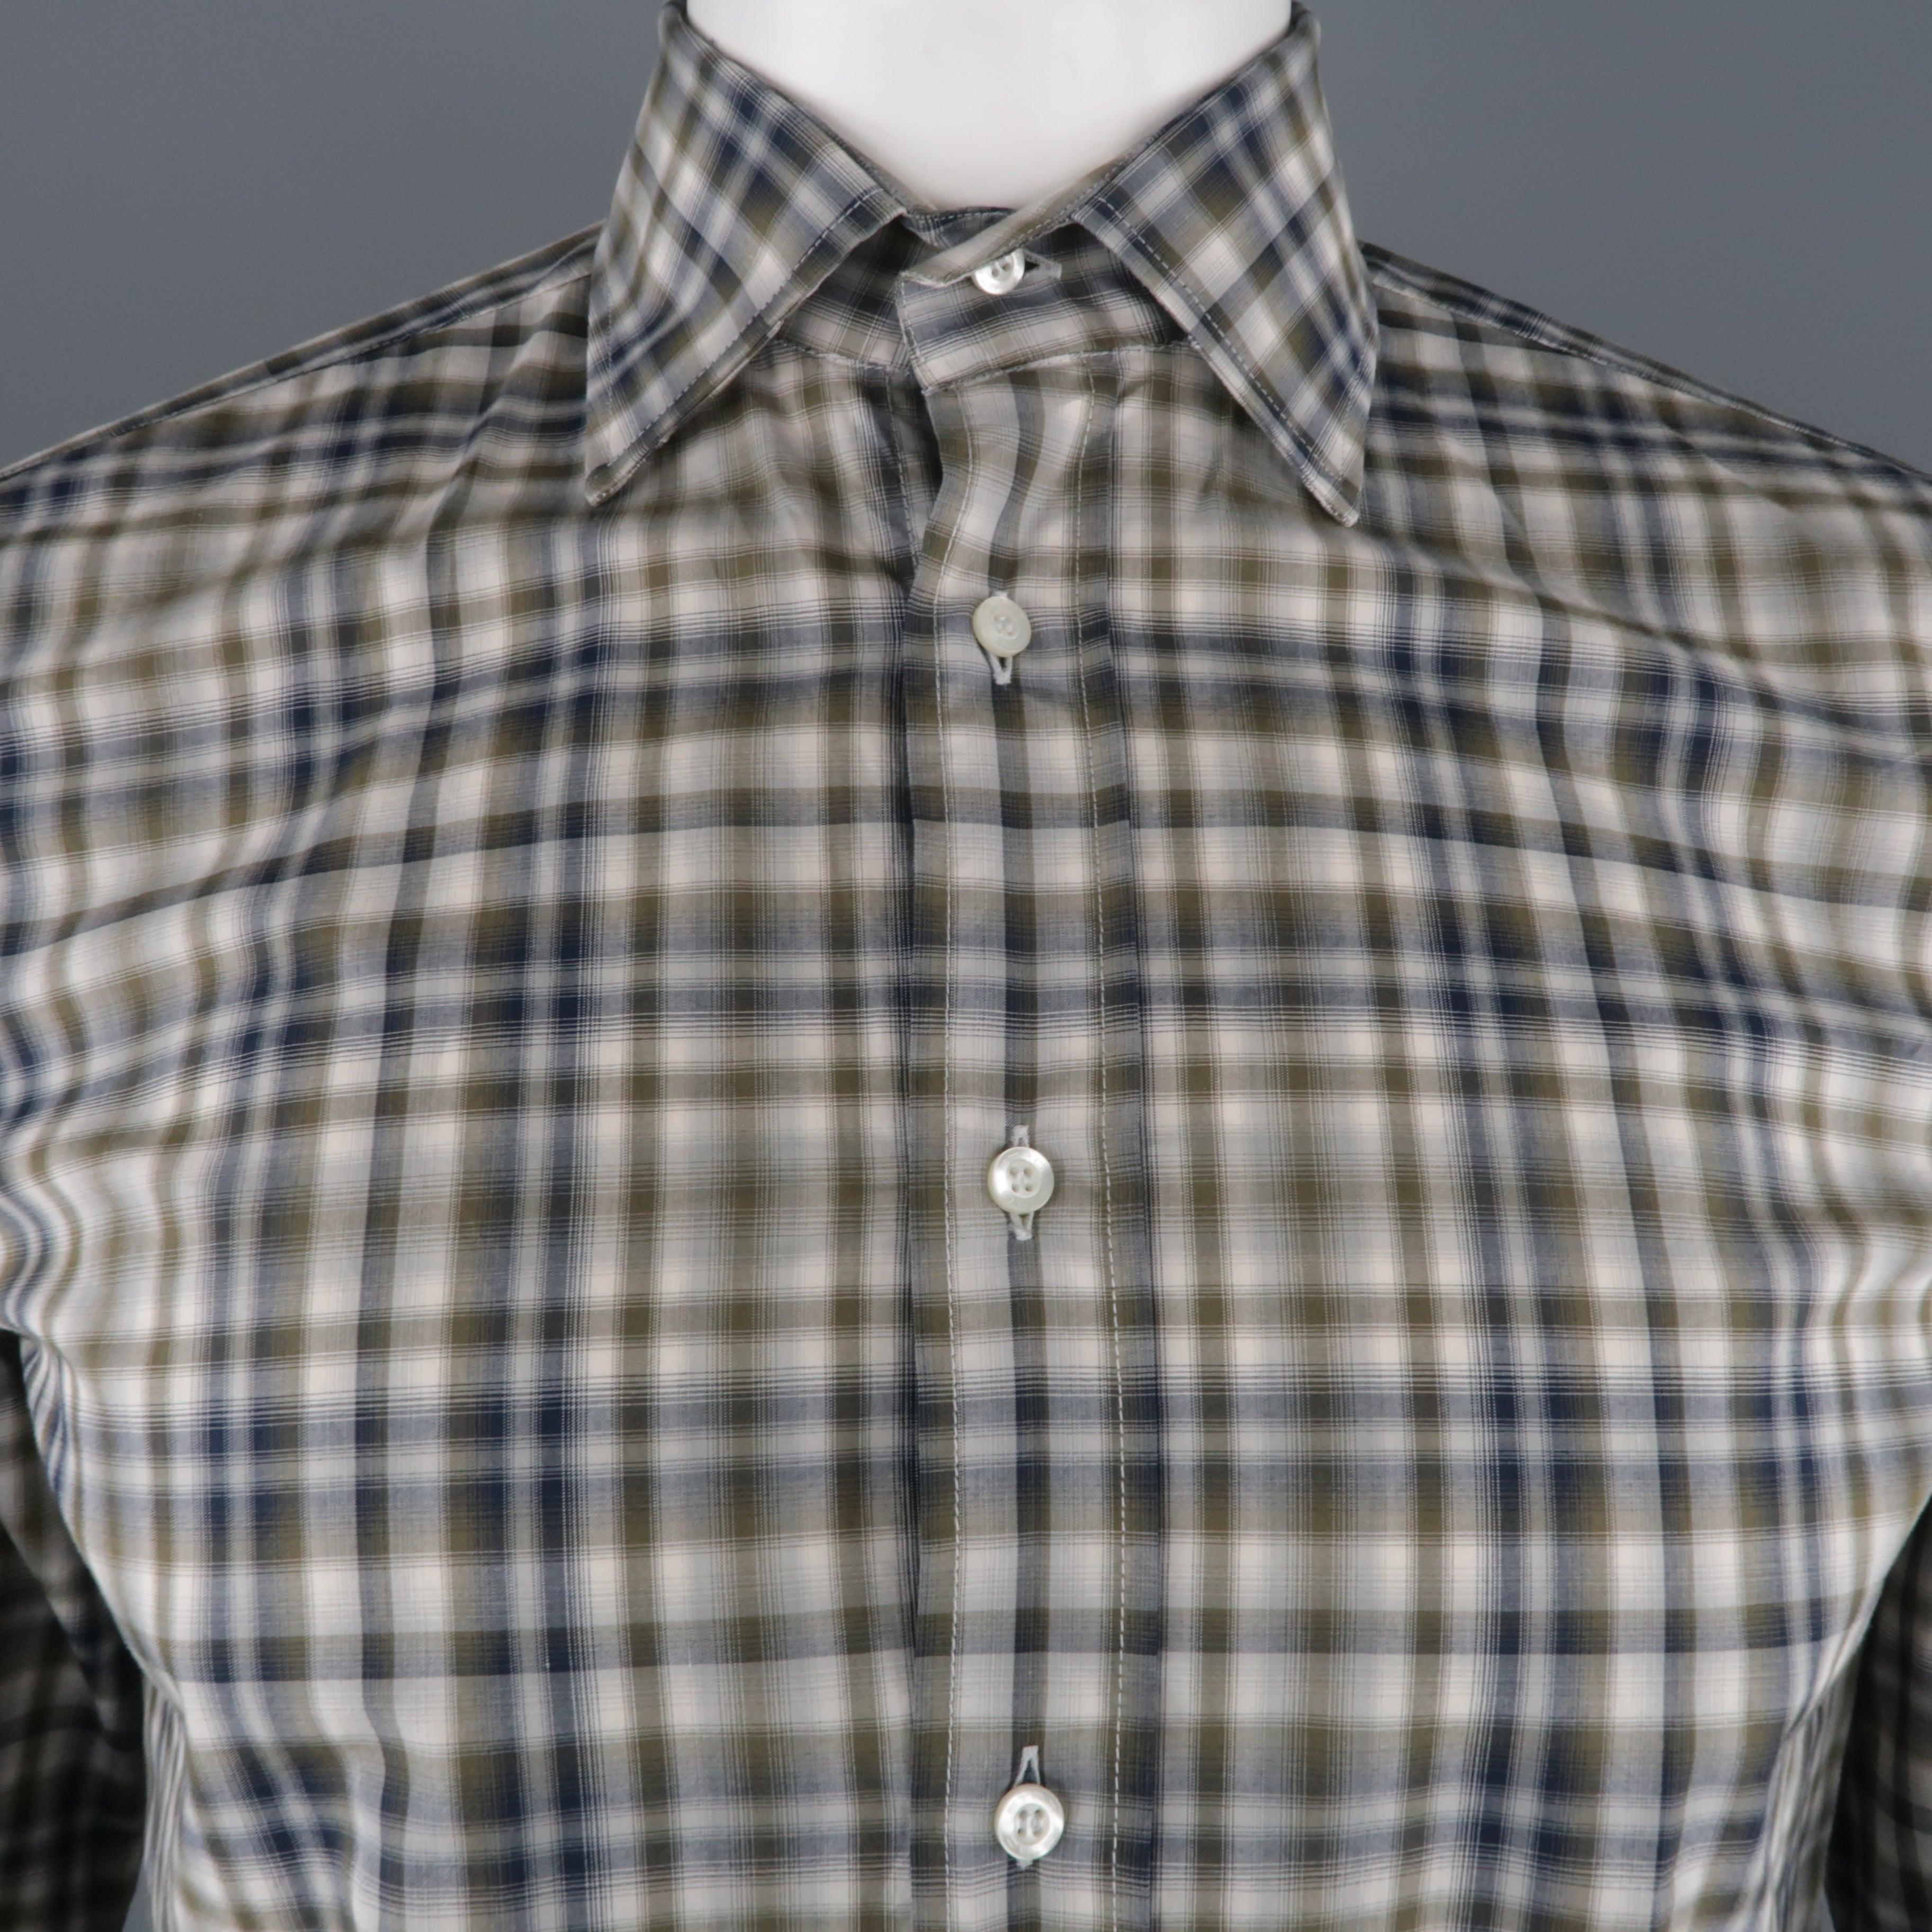 ETRO shirt comes in a olive and navy plaid cotton featuring a spread collar. Made in Italy.
Excellent Pre-Owned Condition.
 

Marked:   39
 

Measurements: 
  
l	Shoulder: 17 inches  
l	Chest: 45 inches  
l	Sleeve: 25.5 inches  
l	Length: 26.5